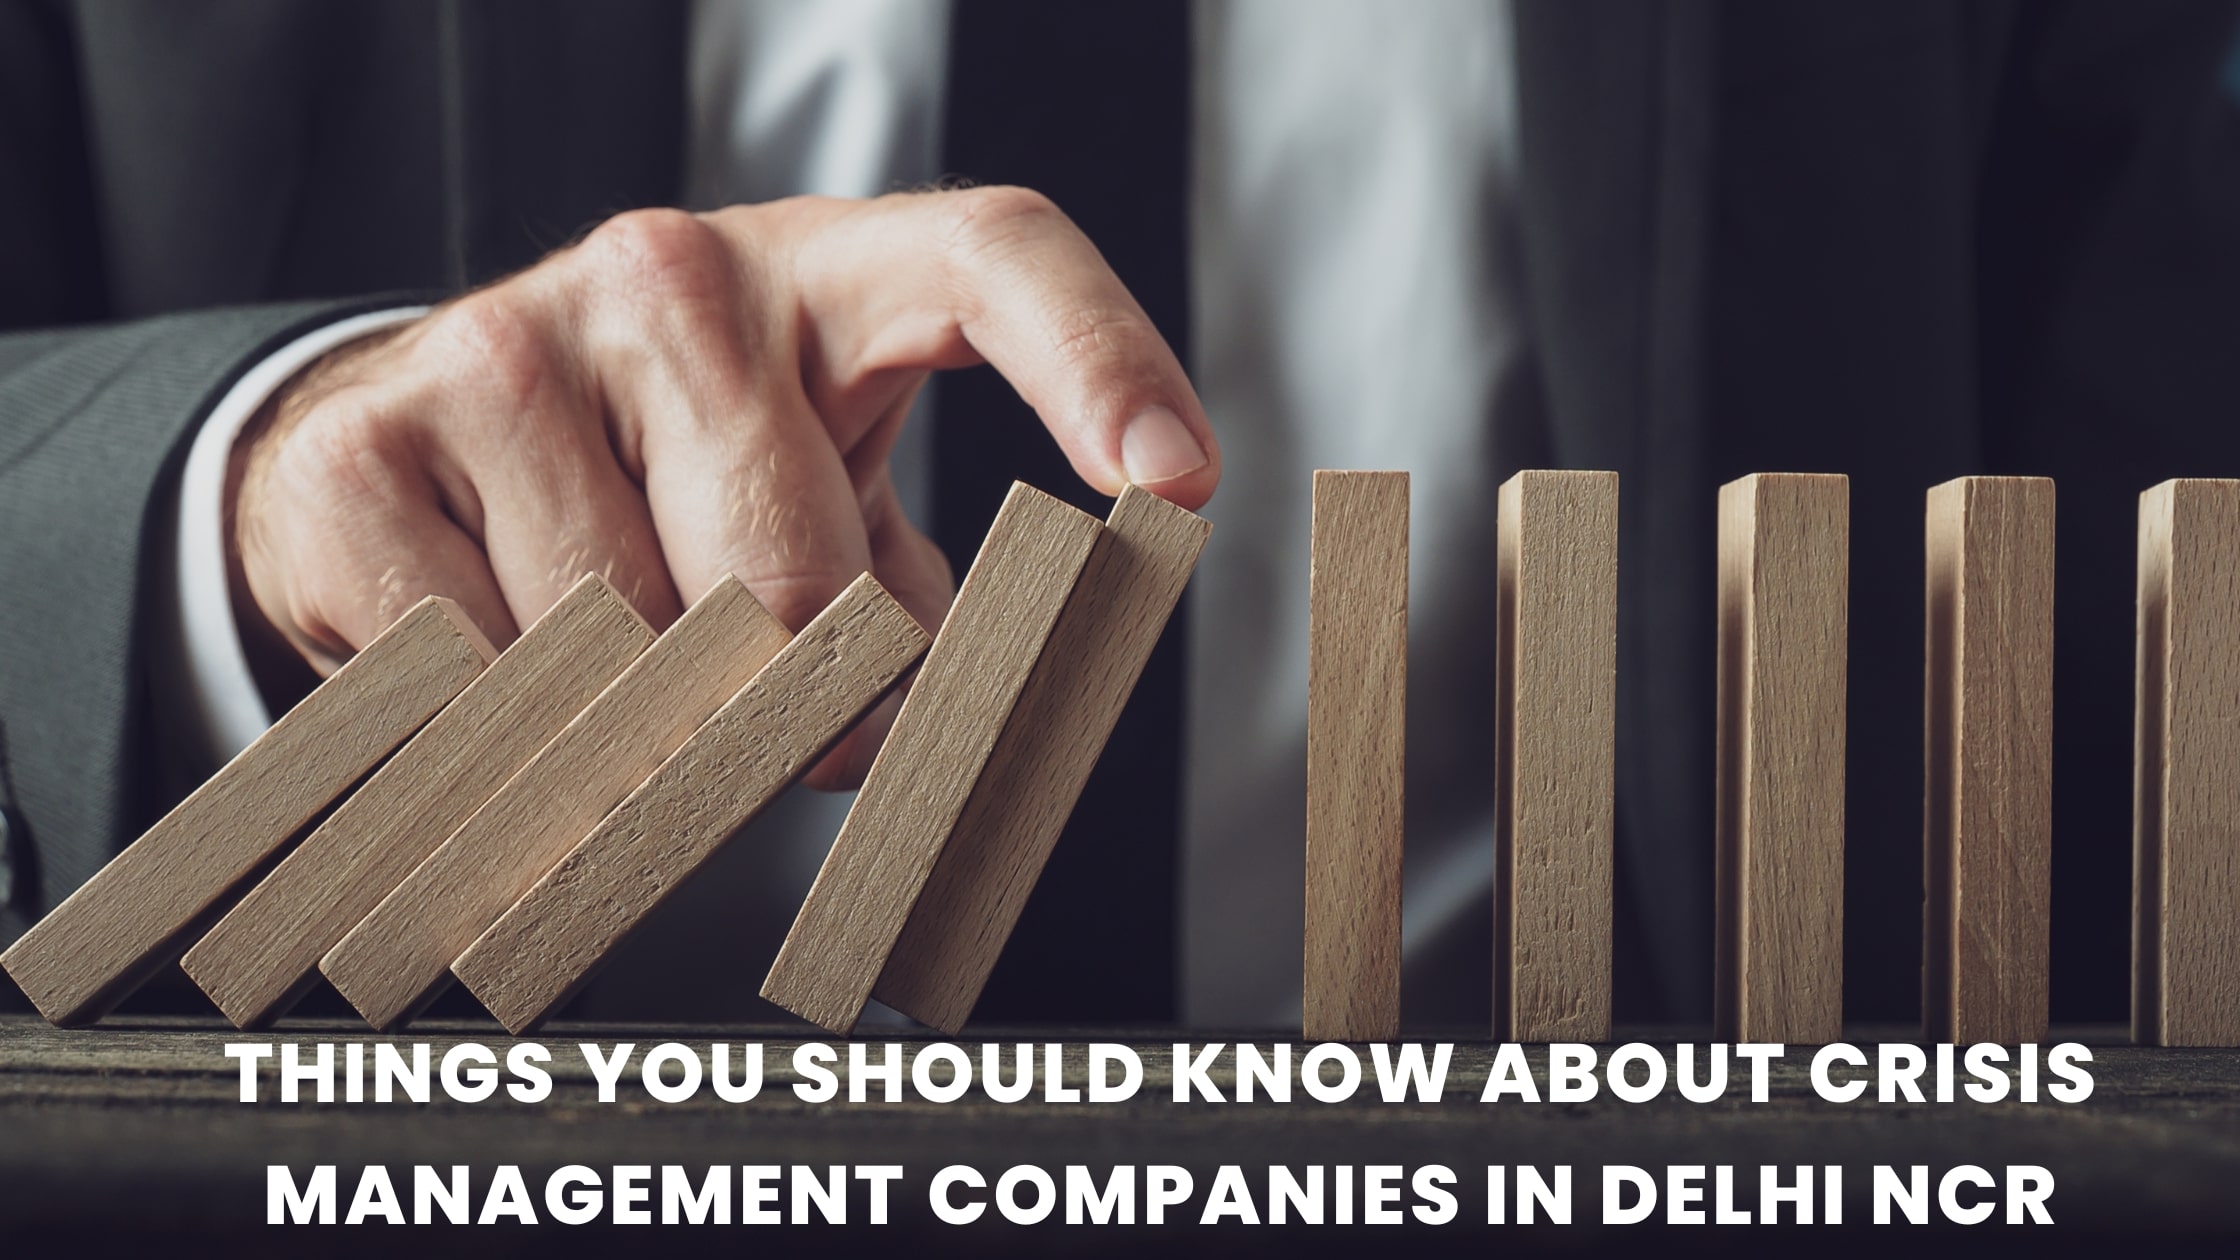 Things You Should Know About Crisis Management Companies in Delhi NCR